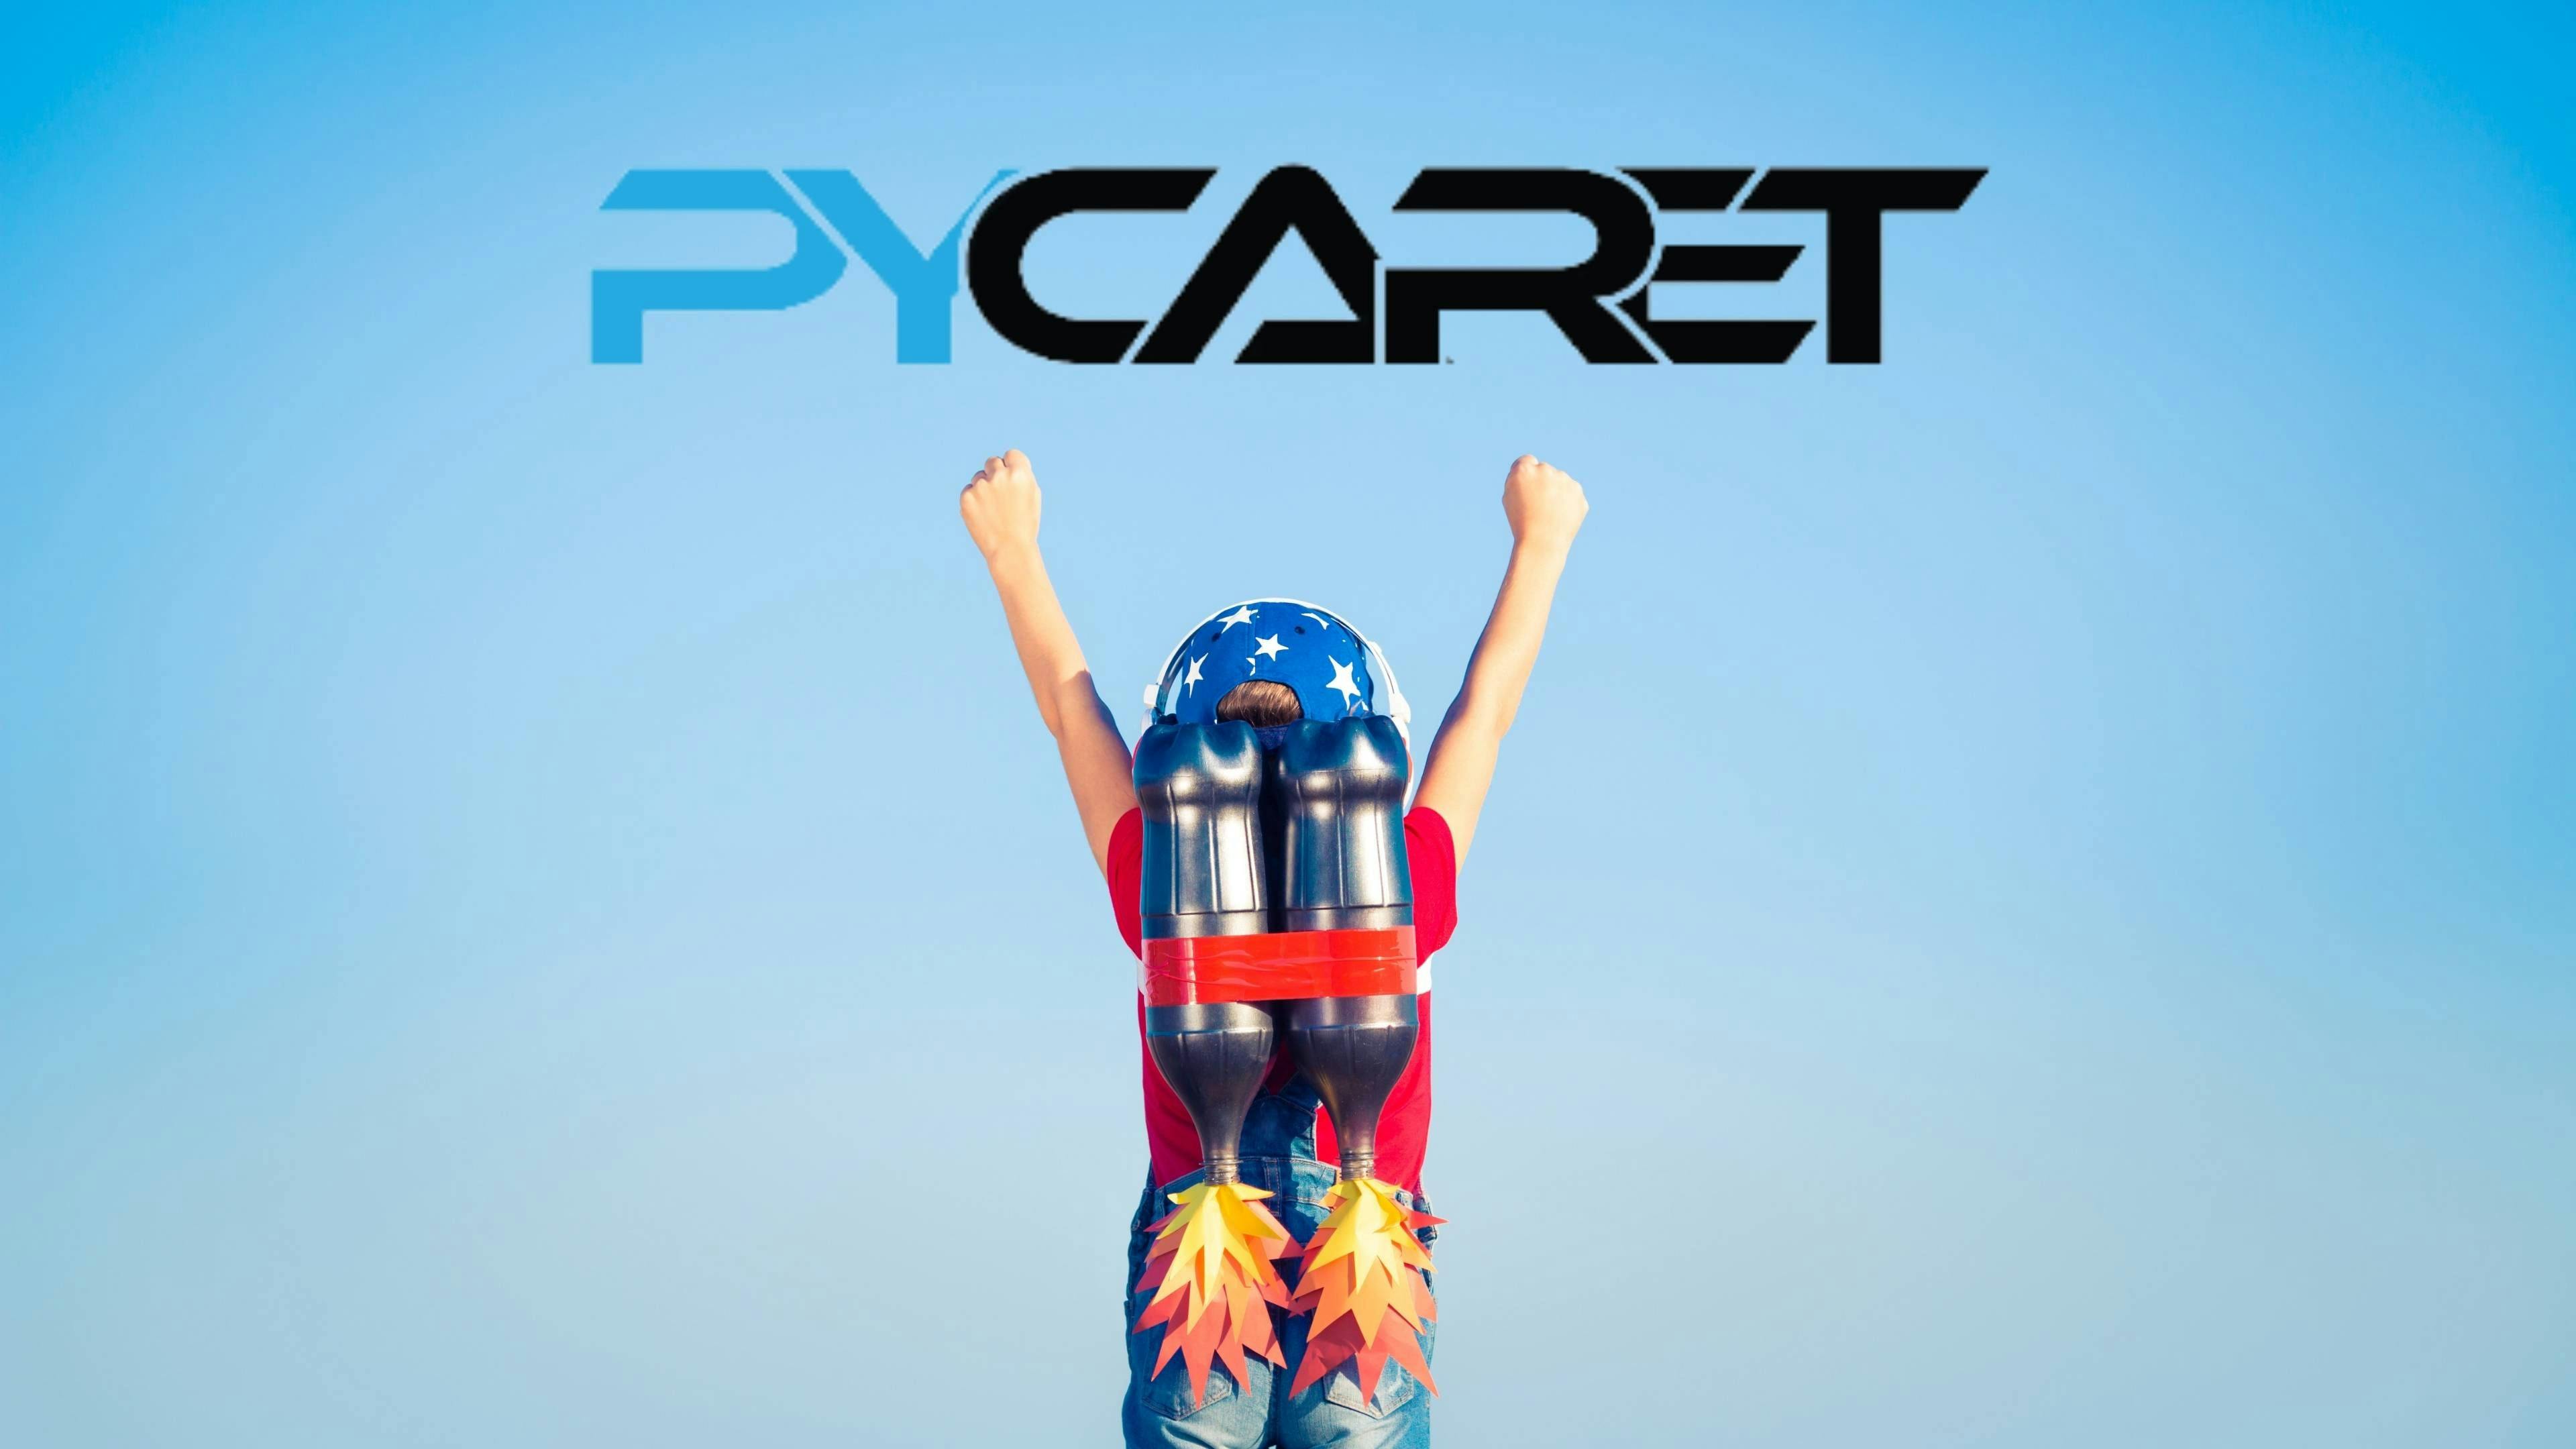 featured image - Pycaret: A Faster Way to Build Machine Learning Models